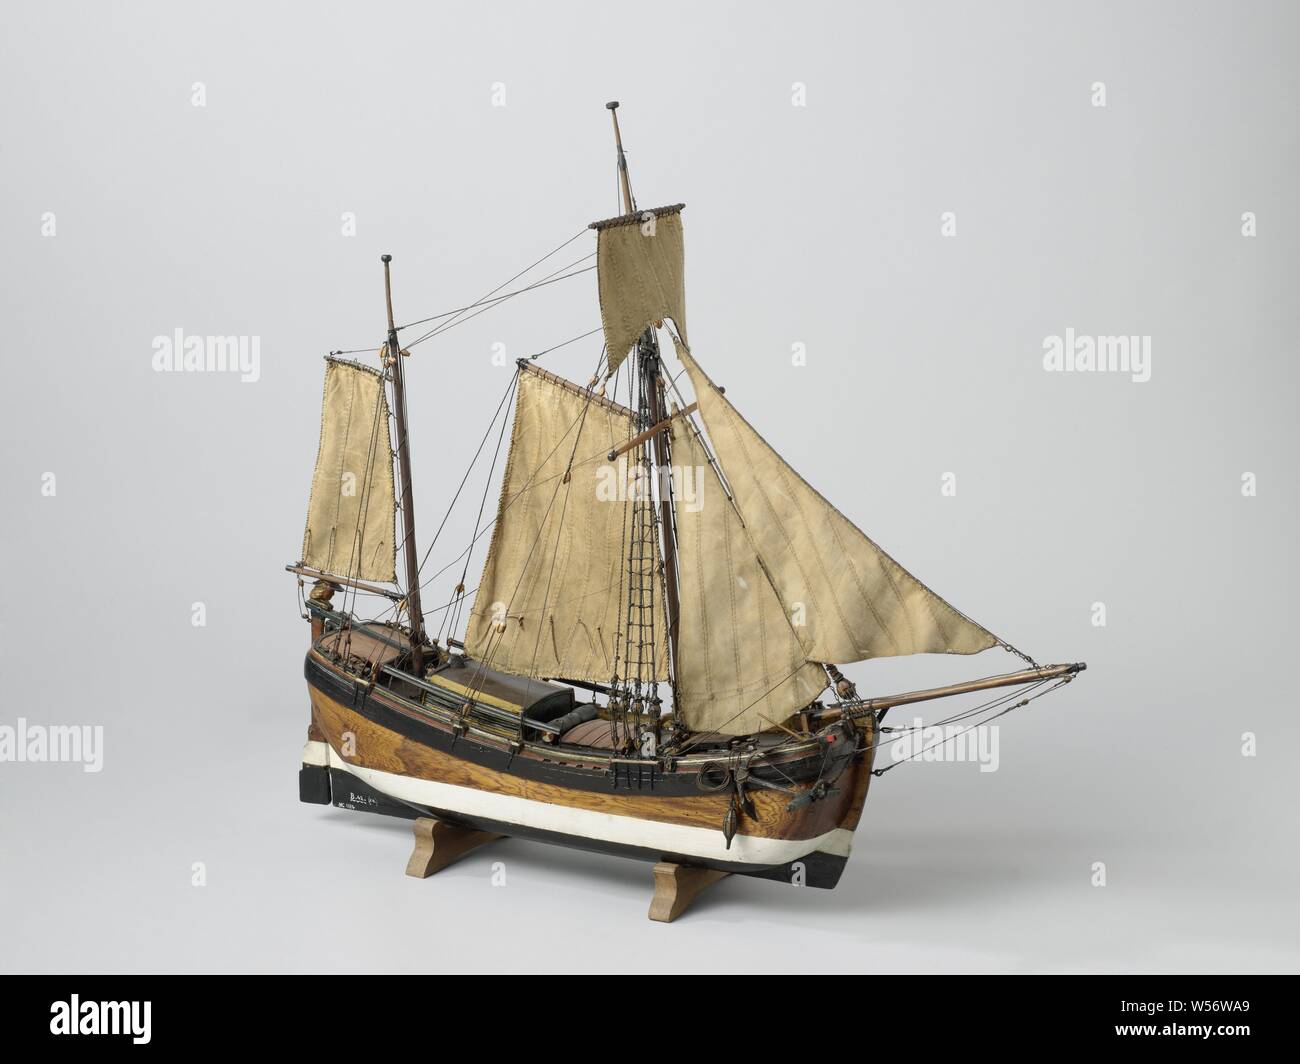 Model of a coffe, Model of a Koff, Witnessed and polychromed block model of a two-mast coffe. The model has one main deck with shutters, and behind a sunken cabin with a campaign deck on top. Flat bow with curved bow, round stern with two ports. Long straight rudder with rudder head in the shape of a human head with hat, tiller over the campaign deck. The model is equipped with an anchor, a roasting spindle, three tons, a pump and a guard rail. The sheer comes up and eight, a wide bar wood is indicated. Peaked spans, the underwater ship is dyed dark blue with a wide white waterline. The model Stock Photo